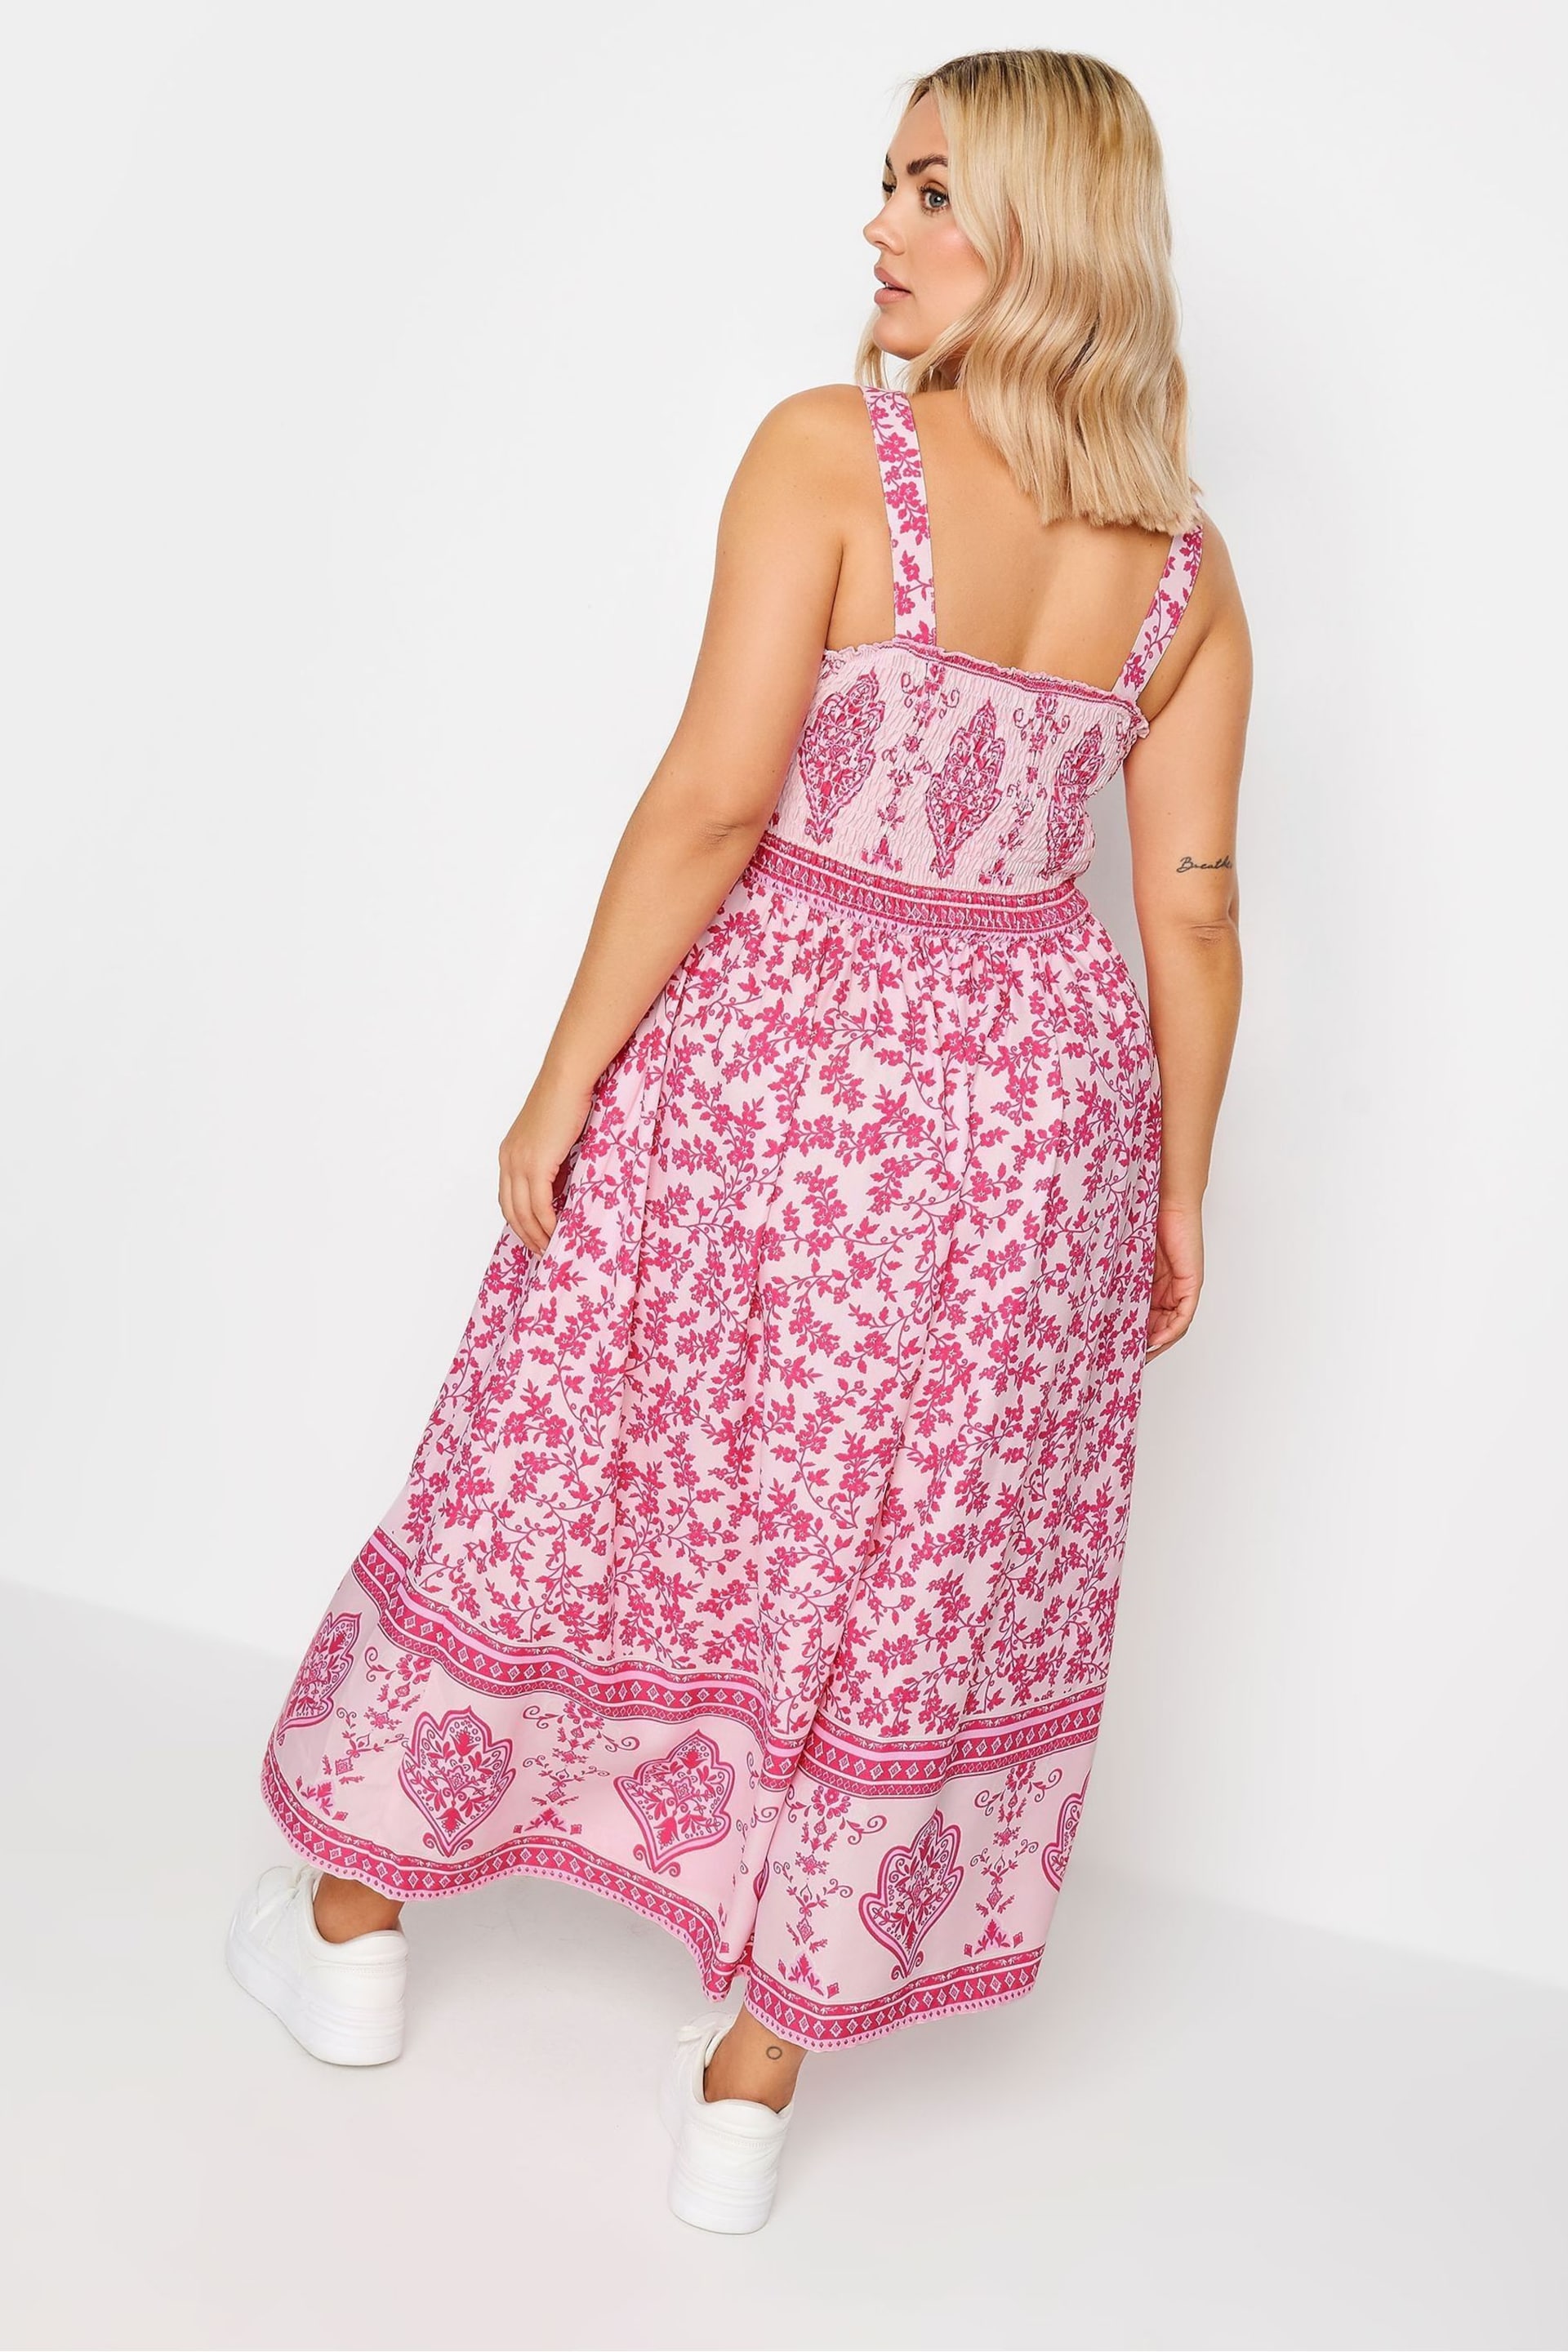 Yours Curve Pink Limited Border Shirred Maxi Dress - Image 3 of 4